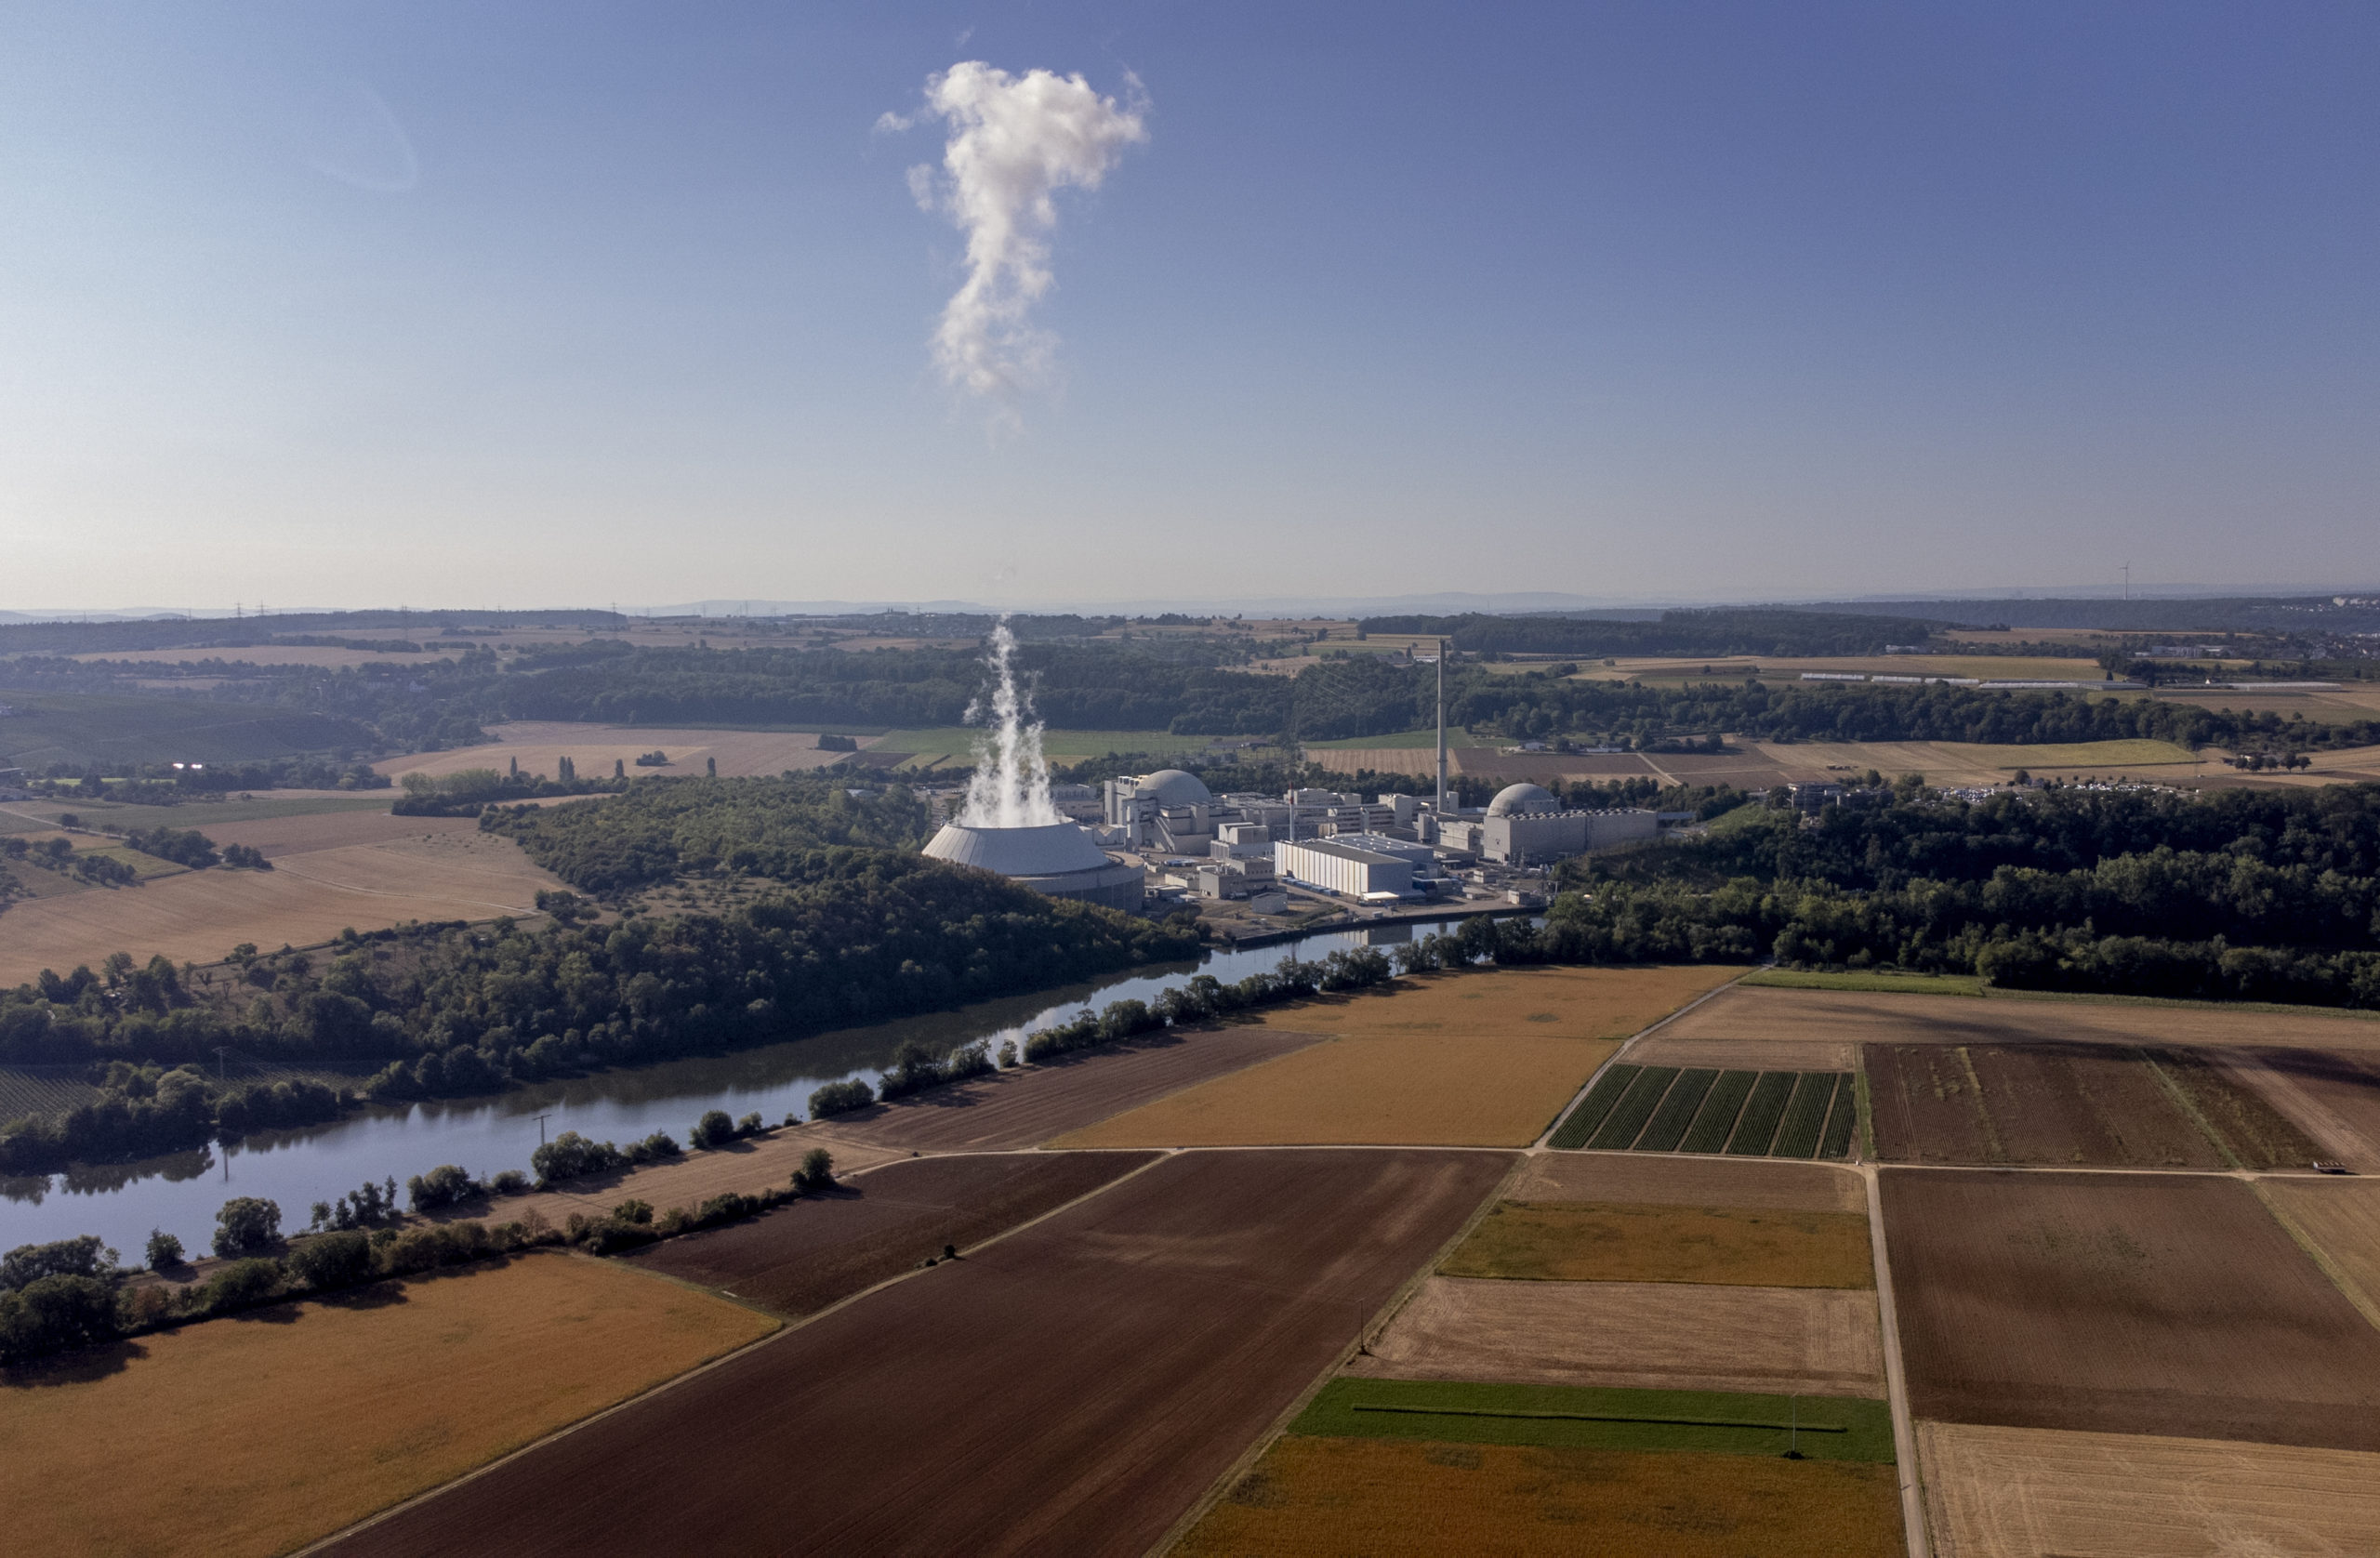 Smoke rises from the German nuclear power plant in Neckarwestheim, Germany on Aug. 22.